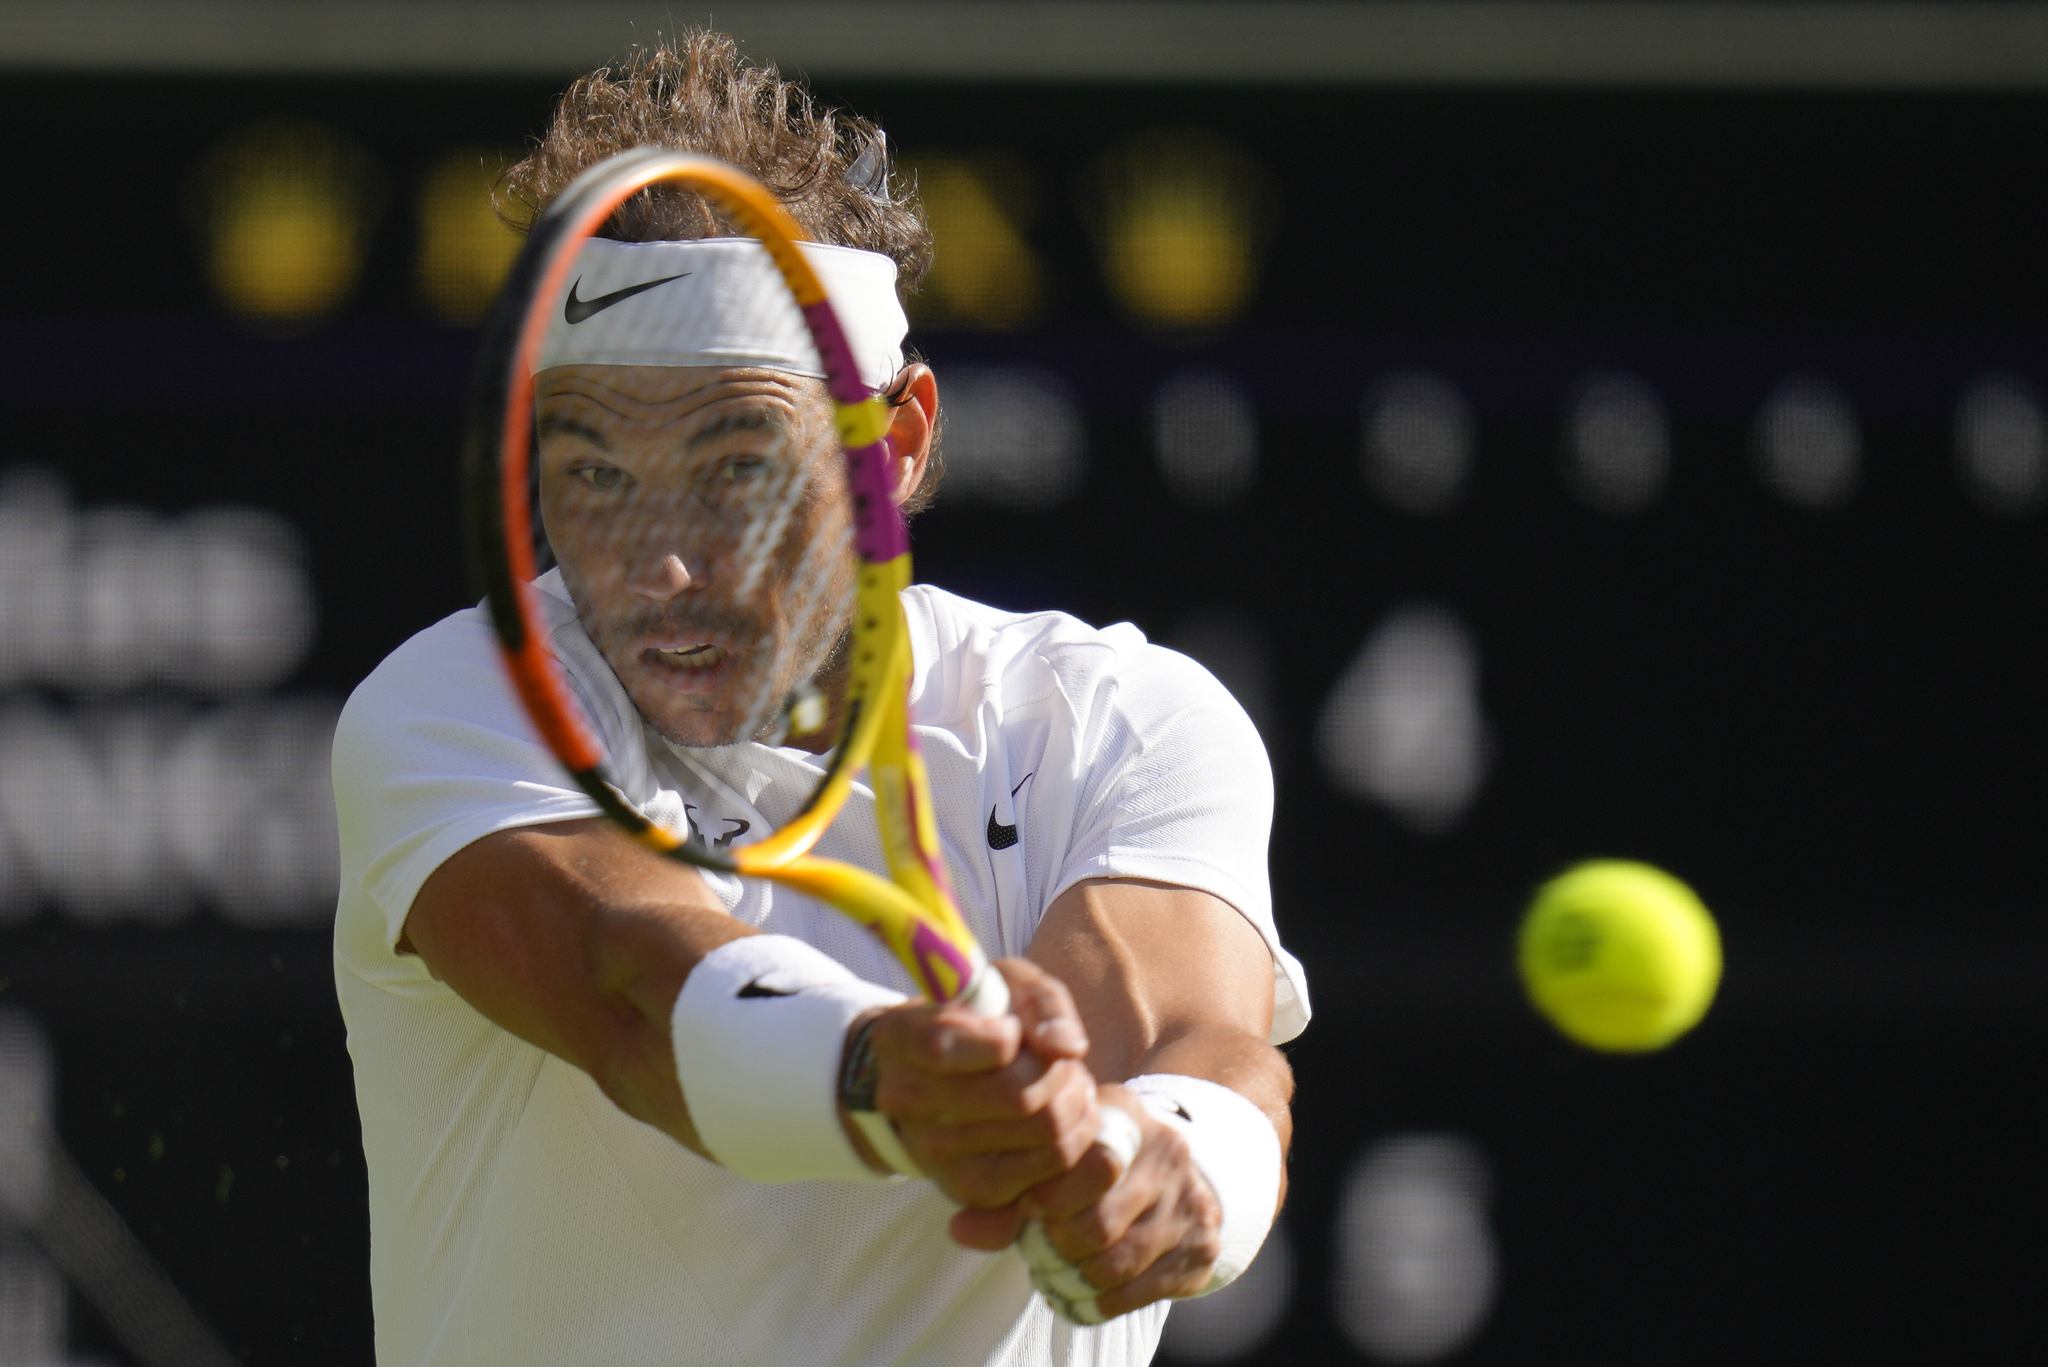 Spain's Rafael  lt;HIT gt;Nadal lt;/HIT gt; returns to Lithuania's Ricardas Berankis in a second round men's singles match on day four of the Wimbledon tennis championships in London, Thursday, June 30, 2022. (AP Photo/Kirsty Wigglesworth)